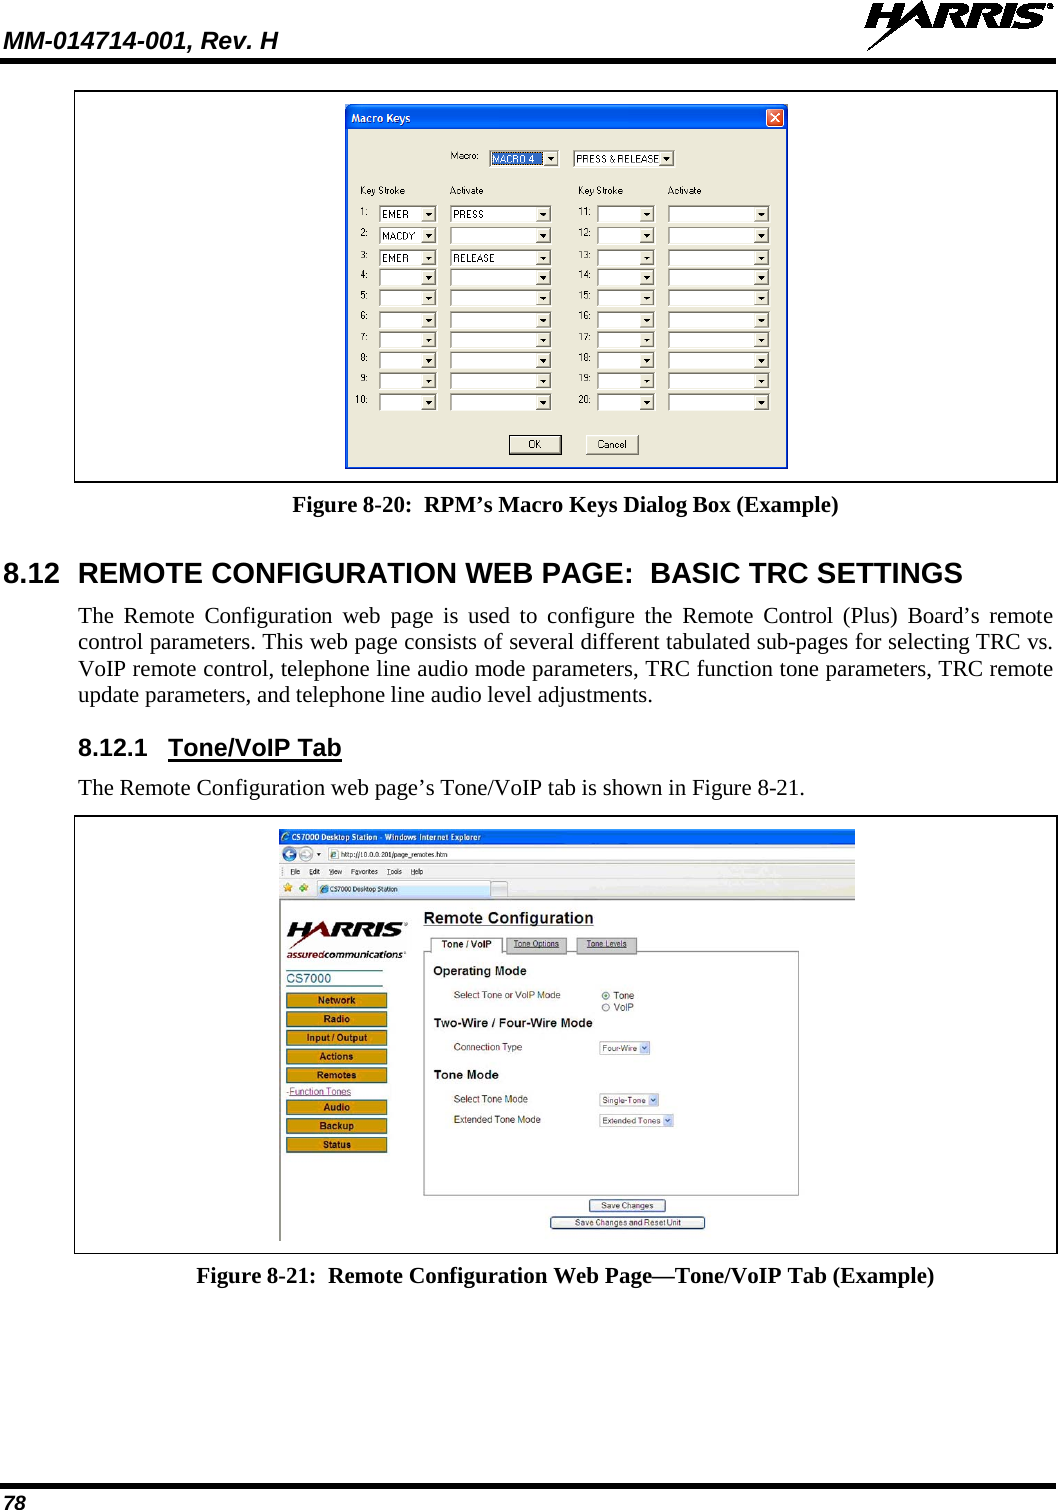 MM-014714-001, Rev. H   78  Figure 8-20:  RPM’s Macro Keys Dialog Box (Example)  8.12 REMOTE CONFIGURATION WEB PAGE:  BASIC TRC SETTINGS The Remote Configuration web  page  is used to configure the Remote Control (Plus) Board’s remote control parameters. This web page consists of several different tabulated sub-pages for selecting TRC vs. VoIP remote control, telephone line audio mode parameters, TRC function tone parameters, TRC remote update parameters, and telephone line audio level adjustments. 8.12.1 Tone/VoIP Tab The Remote Configuration web page’s Tone/VoIP tab is shown in Figure 8-21.   Figure 8-21:  Remote Configuration Web Page—Tone/VoIP Tab (Example)  